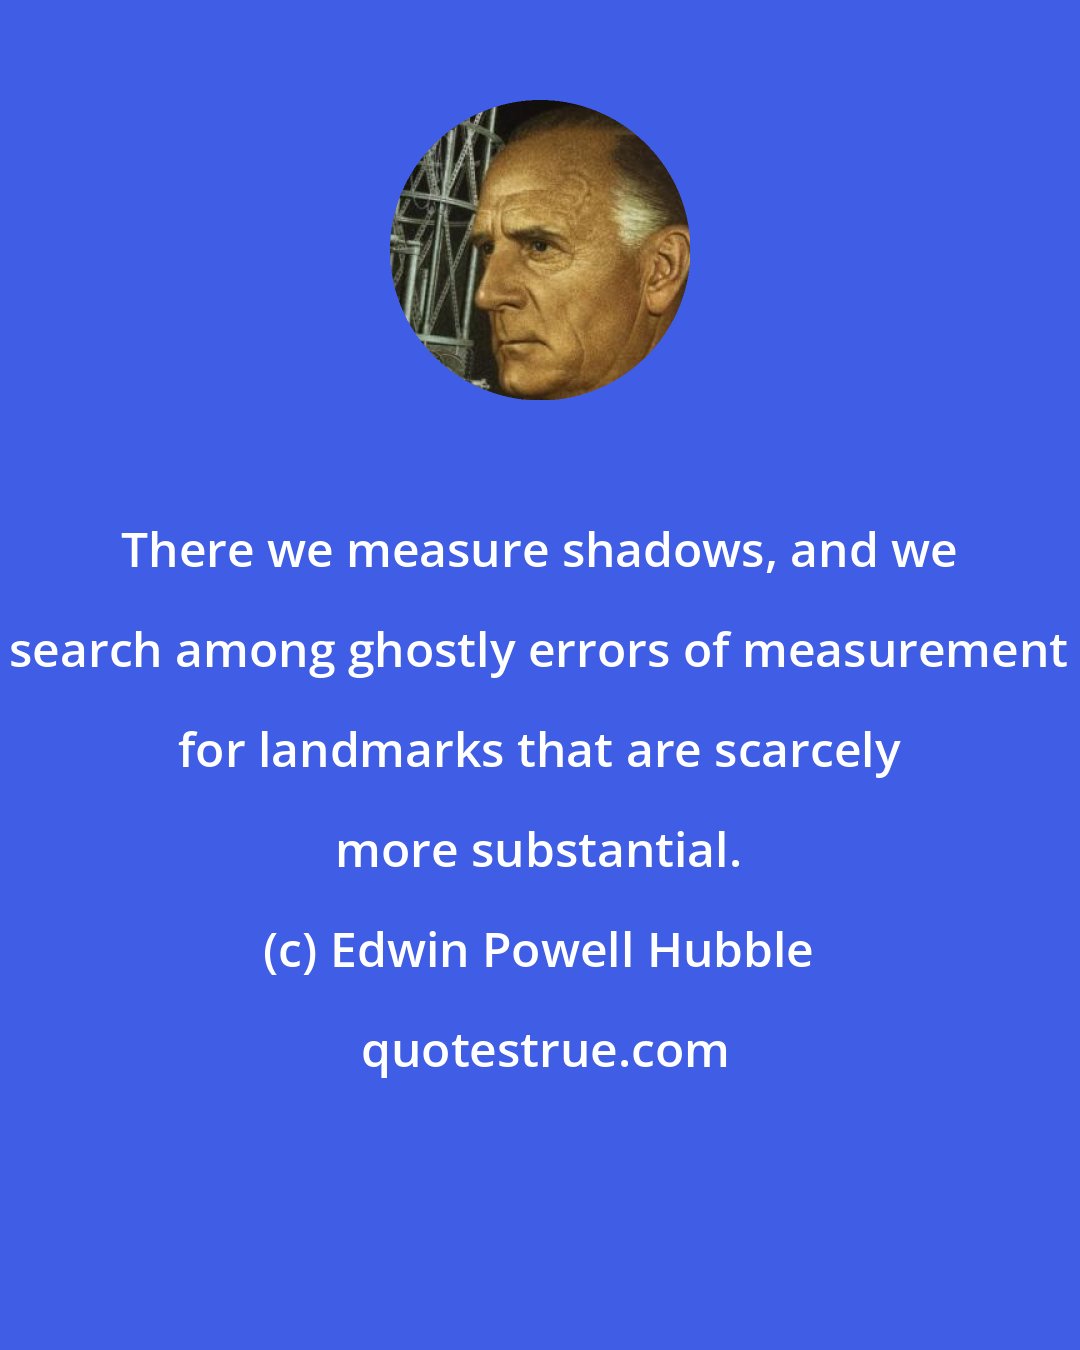 Edwin Powell Hubble: There we measure shadows, and we search among ghostly errors of measurement for landmarks that are scarcely more substantial.